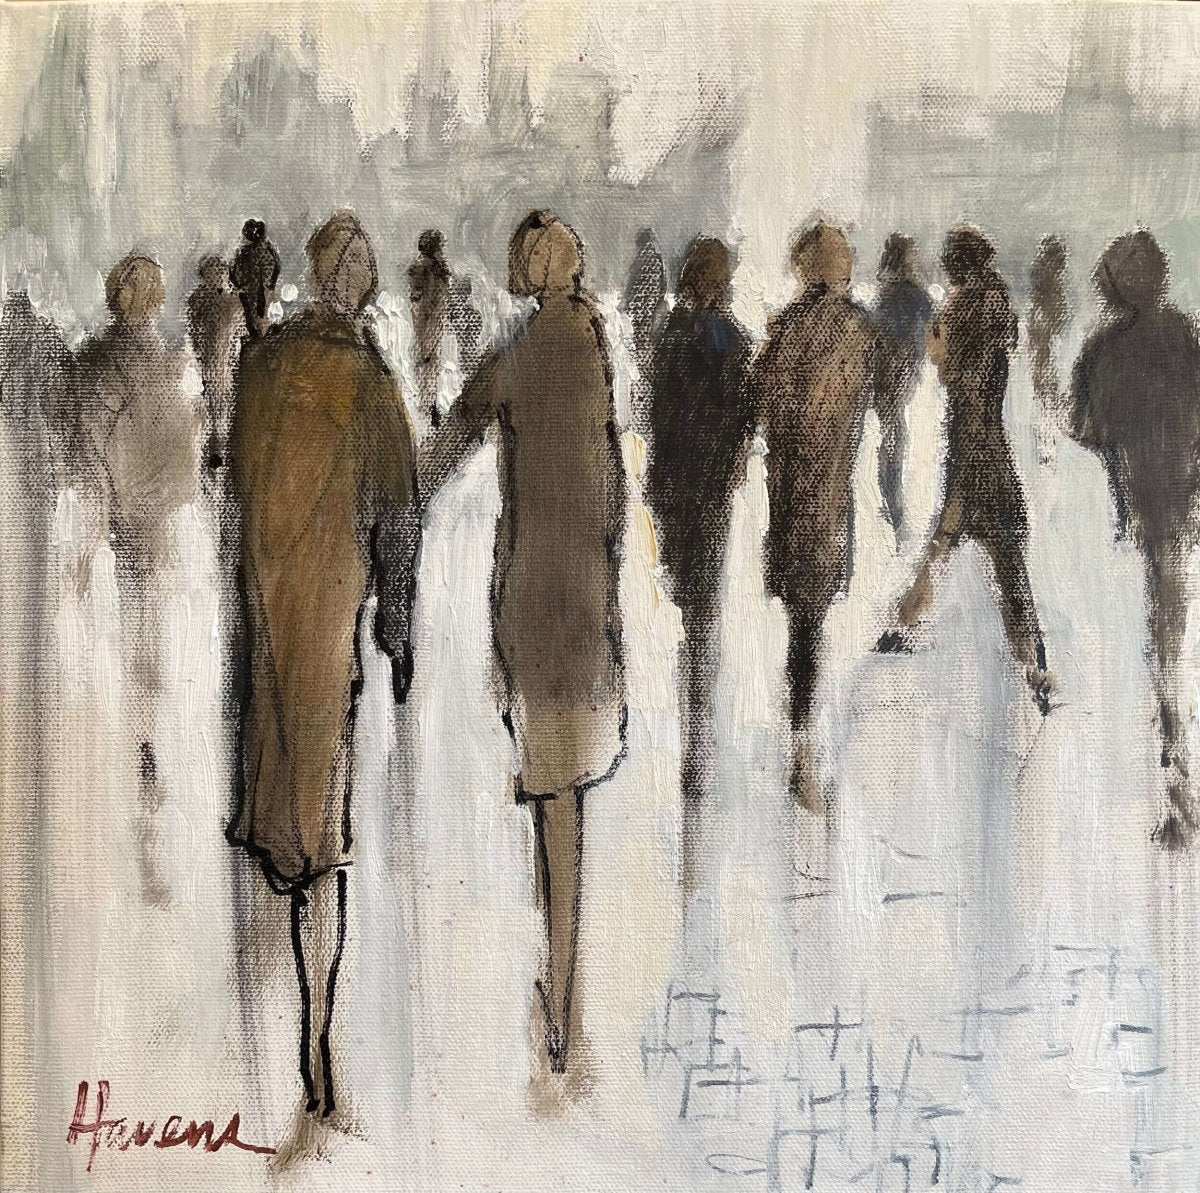 Ships in the Harbor by Betsy Havens at LePrince Galleries